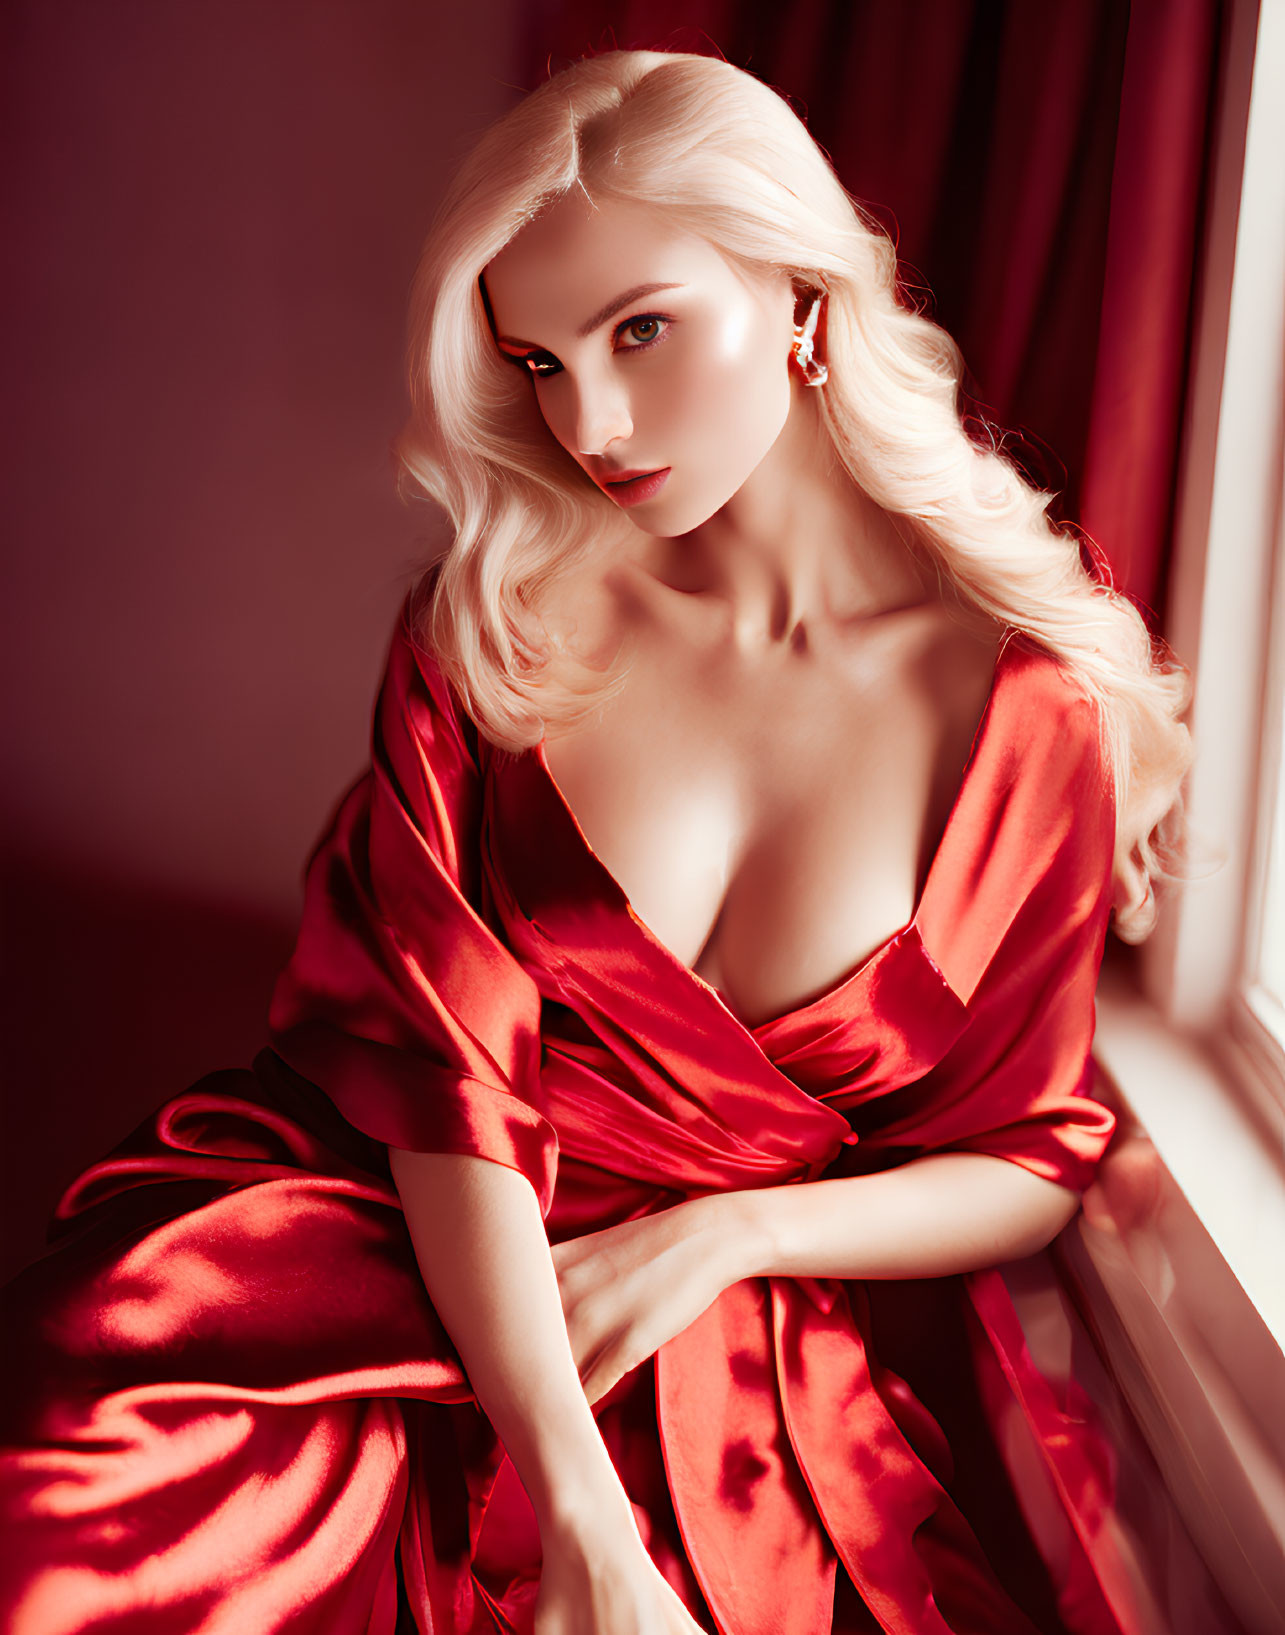 Blond Woman in Red Satin Dress by Window with Warm Light